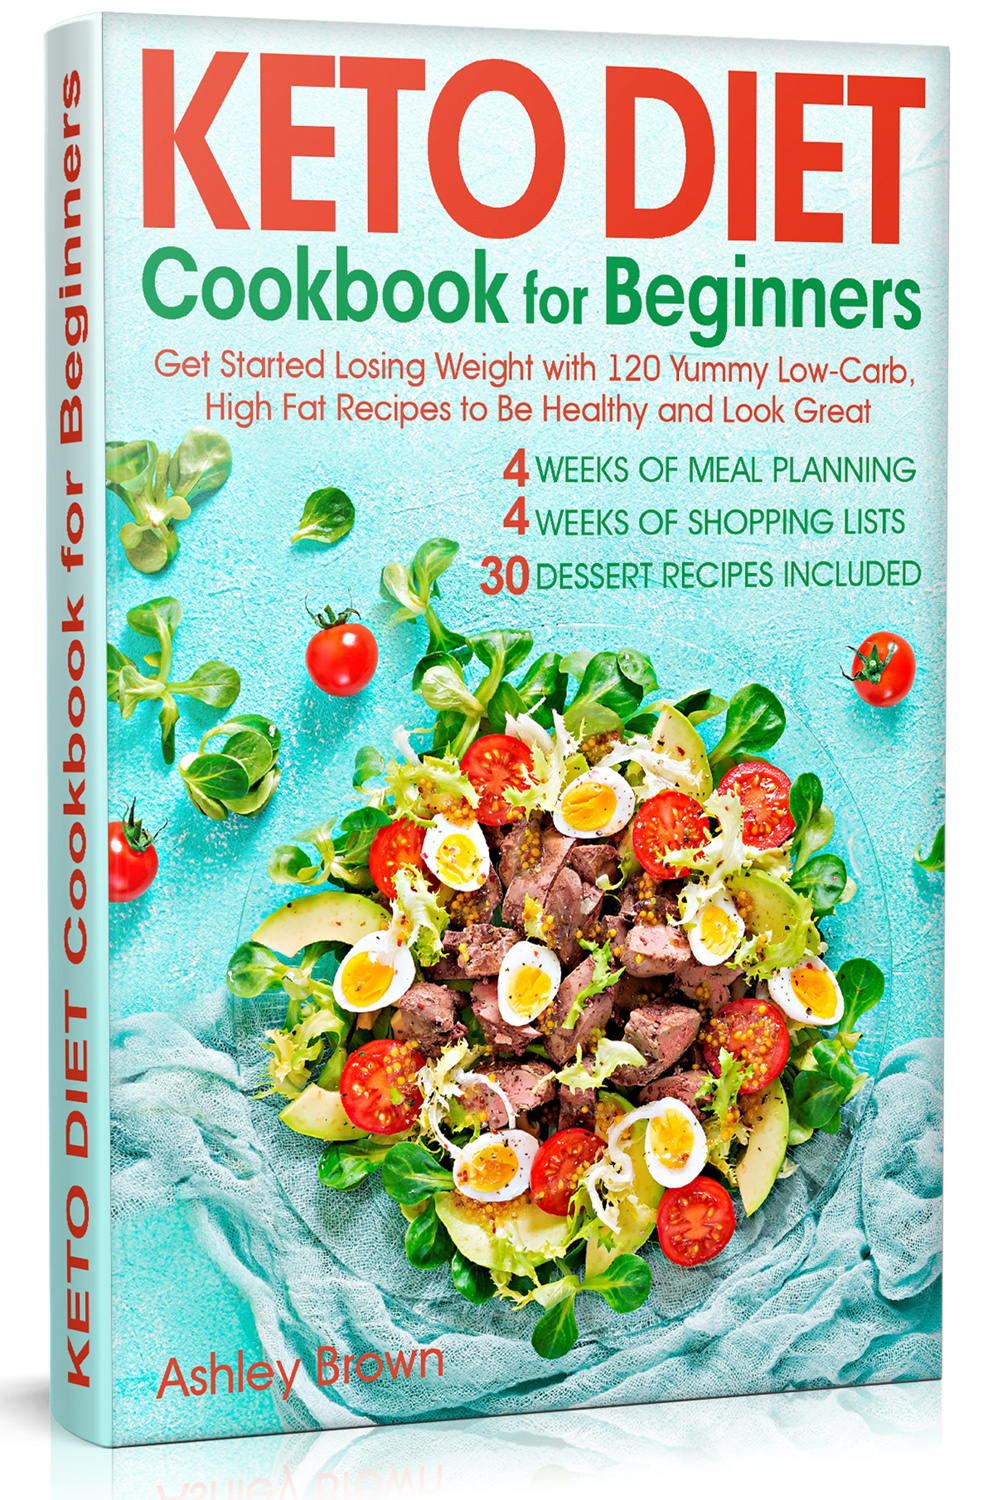 FREE: Keto Diet Cookbook for Beginners: Get Started Losing Weight with 120 Yummy Low-Carb, High-Fat Recipes to Be Healthy and Look Great by Ashley Brown